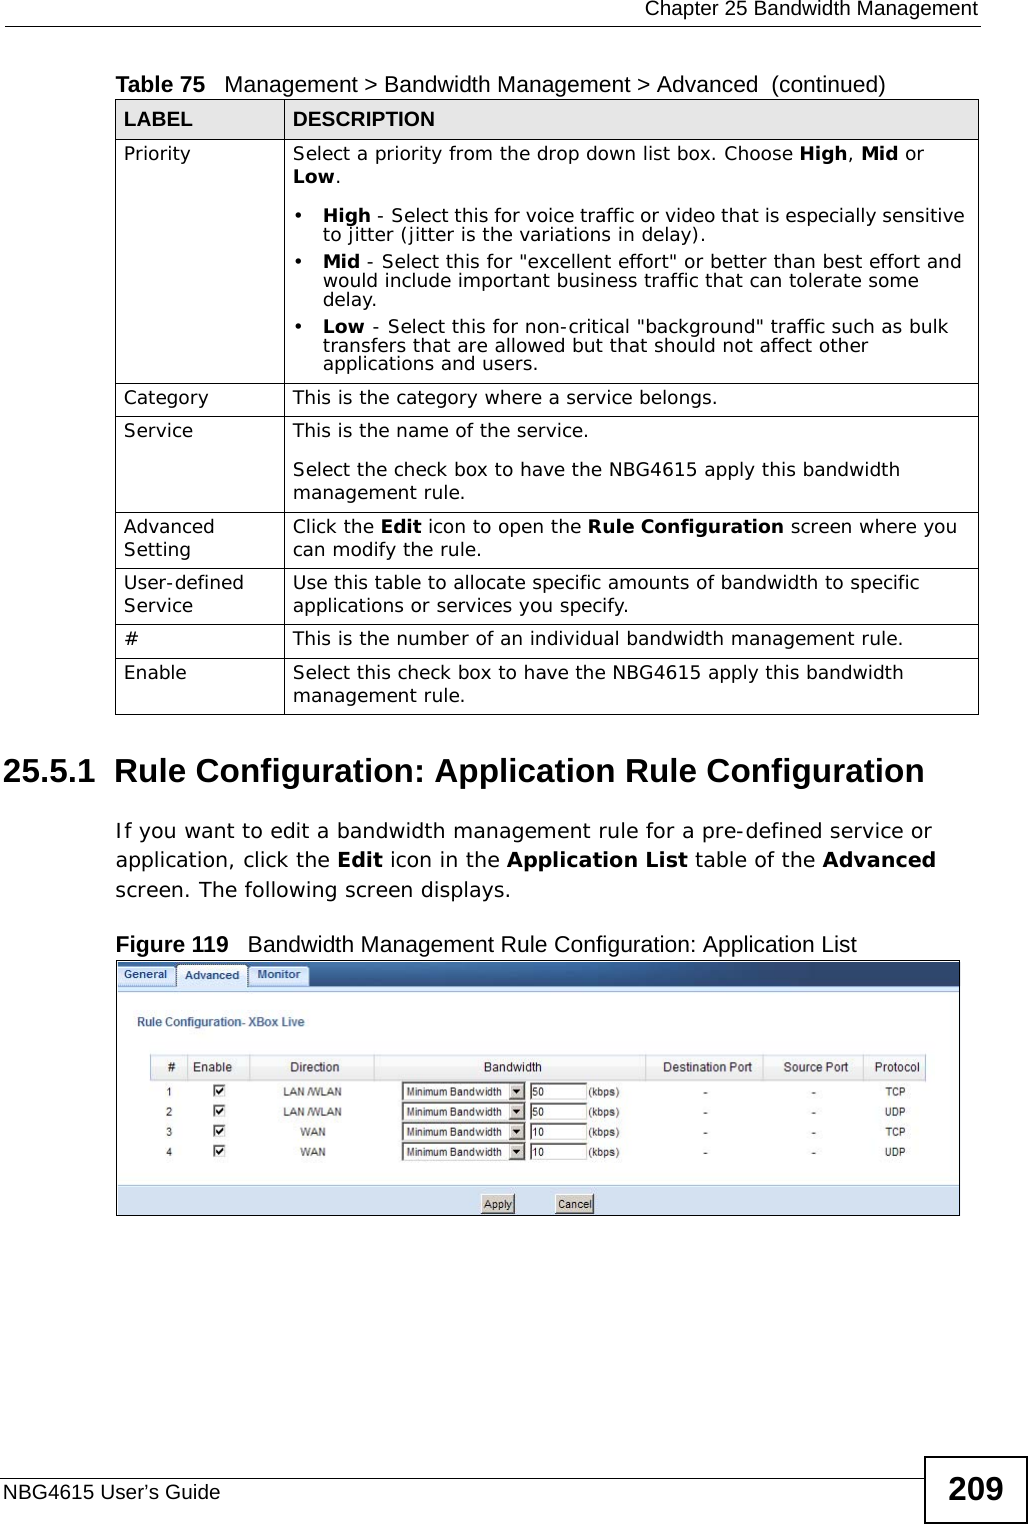  Chapter 25 Bandwidth ManagementNBG4615 User’s Guide 20925.5.1  Rule Configuration: Application Rule Configuration    If you want to edit a bandwidth management rule for a pre-defined service or application, click the Edit icon in the Application List table of the Advanced screen. The following screen displays.Figure 119   Bandwidth Management Rule Configuration: Application ListPriority Select a priority from the drop down list box. Choose High, Mid or Low.•High - Select this for voice traffic or video that is especially sensitive to jitter (jitter is the variations in delay).•Mid - Select this for &quot;excellent effort&quot; or better than best effort and would include important business traffic that can tolerate some delay.•Low - Select this for non-critical &quot;background&quot; traffic such as bulk transfers that are allowed but that should not affect other applications and users. Category This is the category where a service belongs.Service This is the name of the service.Select the check box to have the NBG4615 apply this bandwidth management rule.Advanced Setting  Click the Edit icon to open the Rule Configuration screen where you can modify the rule.User-defined Service  Use this table to allocate specific amounts of bandwidth to specific applications or services you specify.#This is the number of an individual bandwidth management rule.Enable Select this check box to have the NBG4615 apply this bandwidth management rule.Table 75   Management &gt; Bandwidth Management &gt; Advanced  (continued)LABEL DESCRIPTION